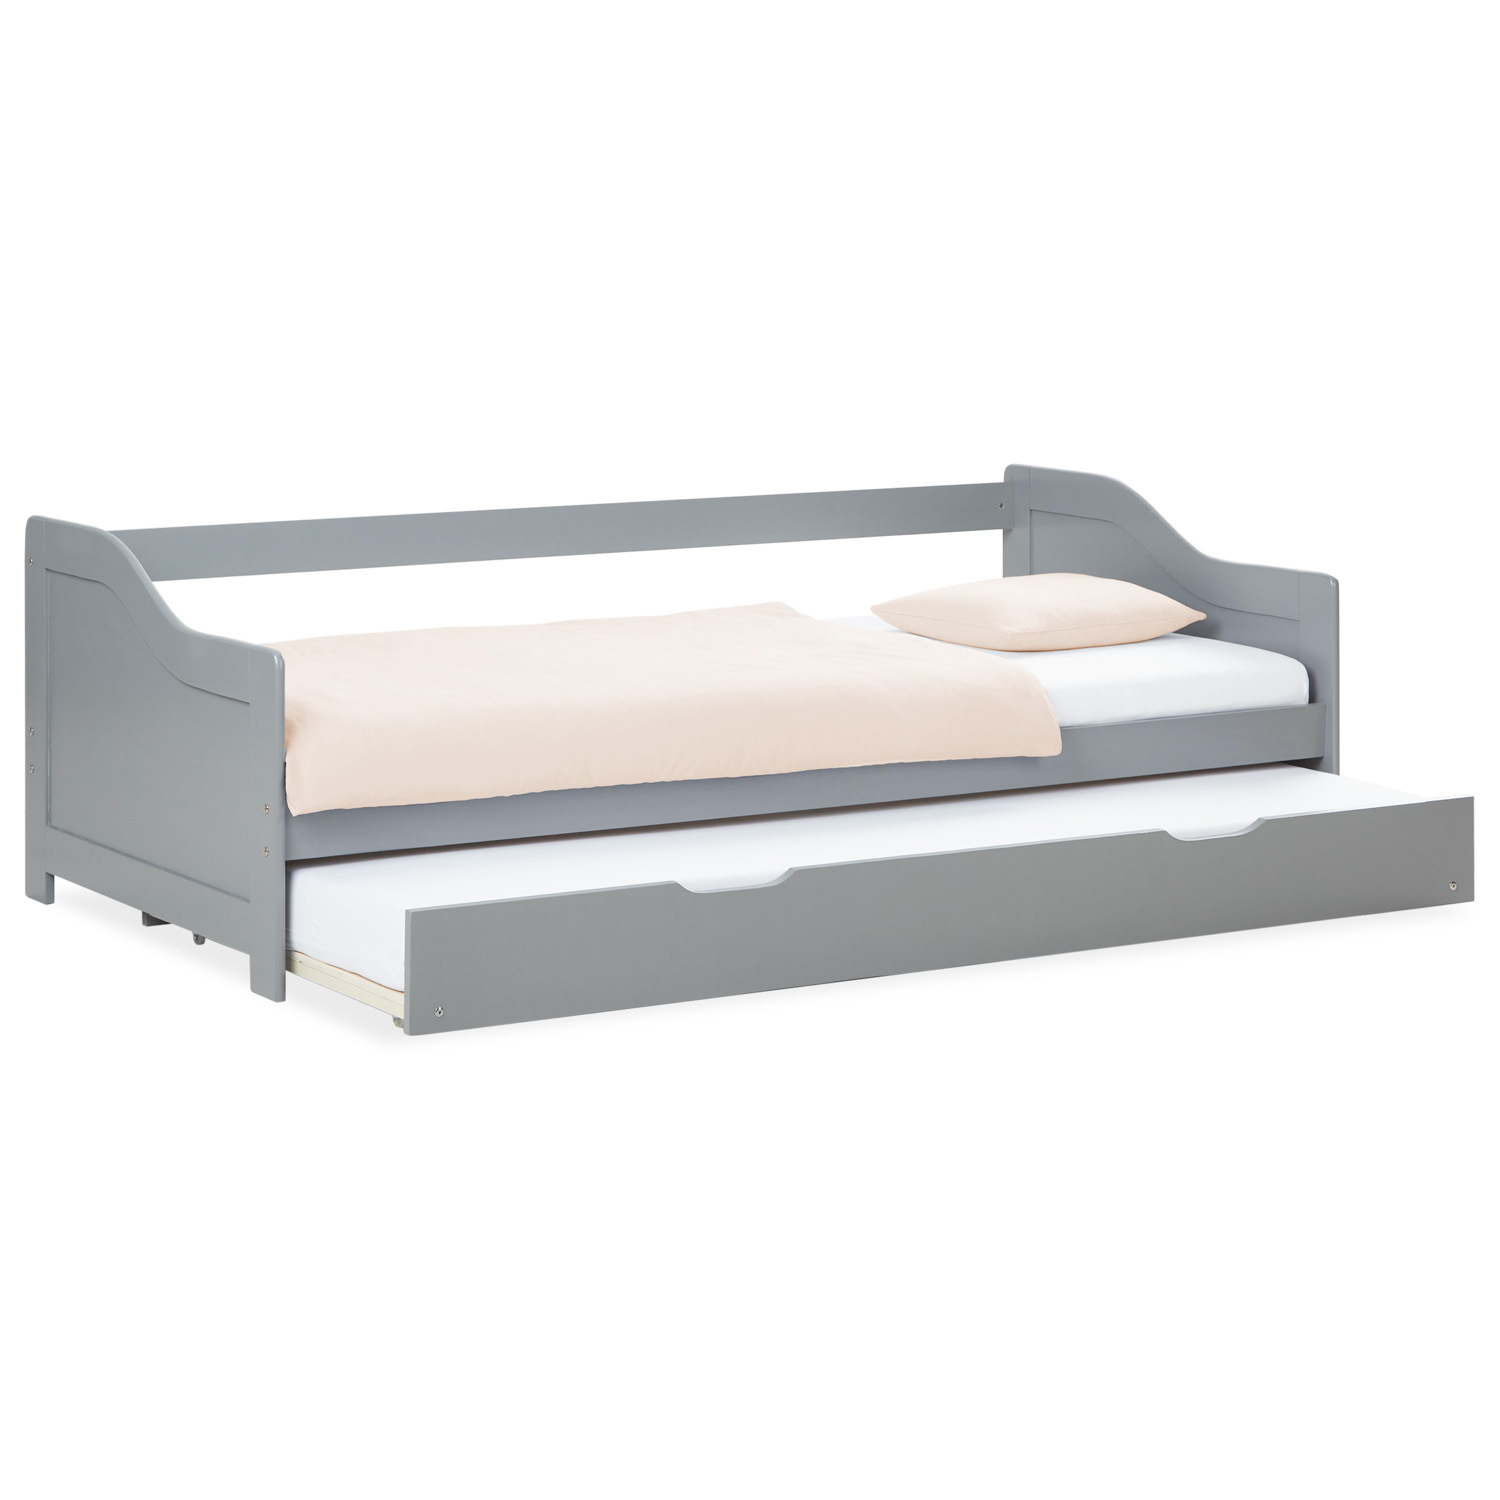 Trundle bed 90x200 cm Single Bed with Pull out bed Wood Grey Daybed with trundle Childrens Bed Kids Bed